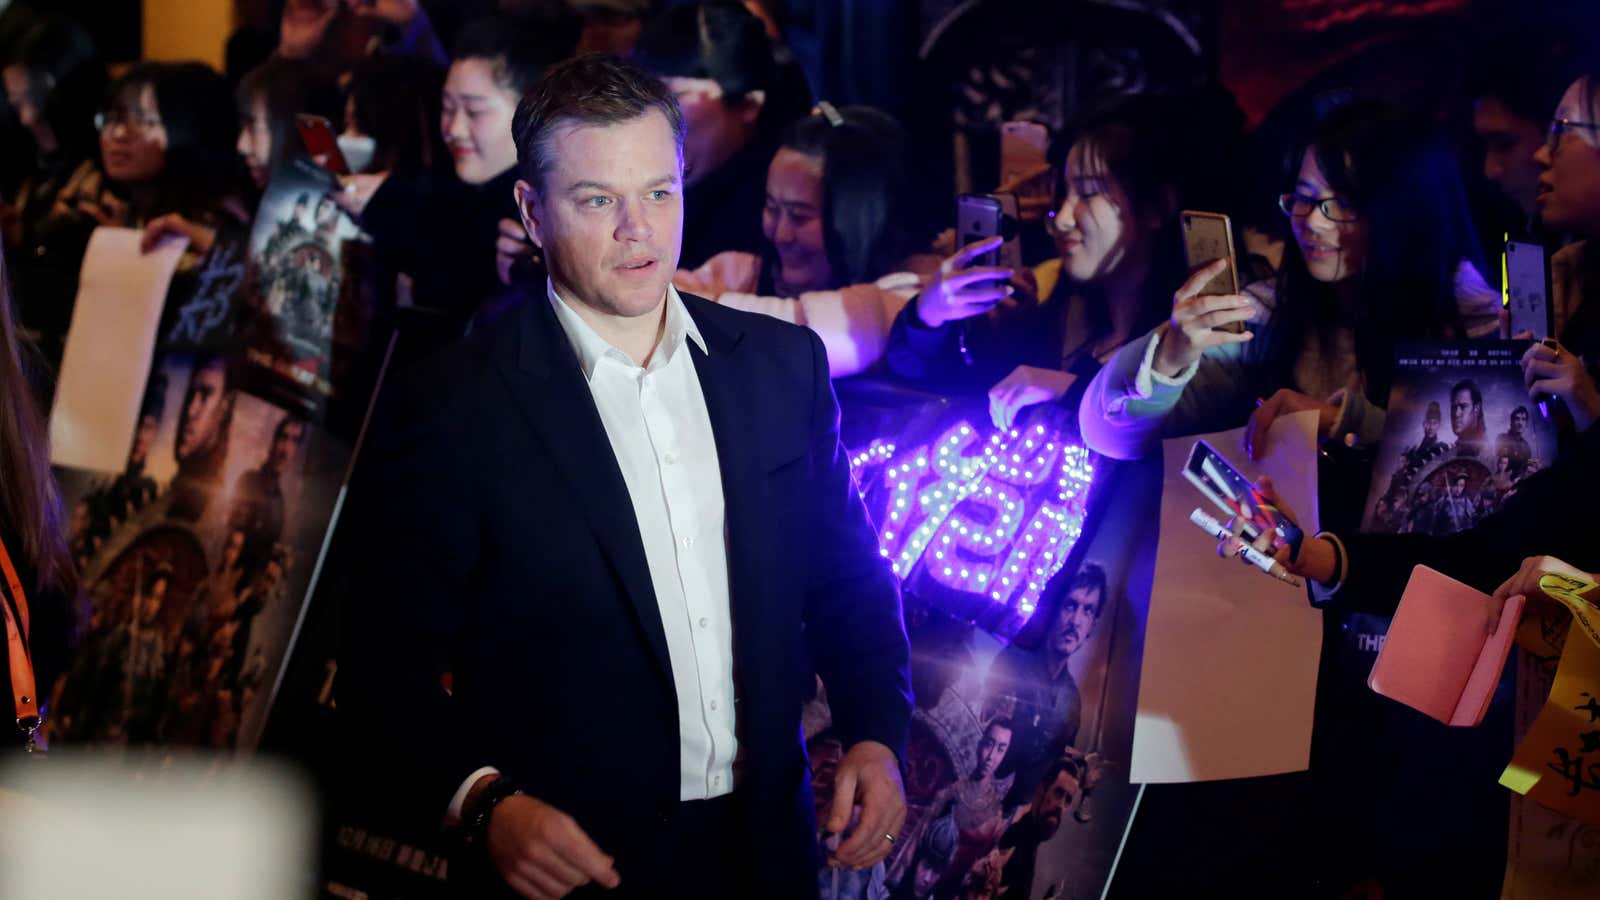 Actor Matt Damon attends a red carpet event promoting Chinese director Zhang Yimou’s latest film “Great Wall” in Beijing, China.